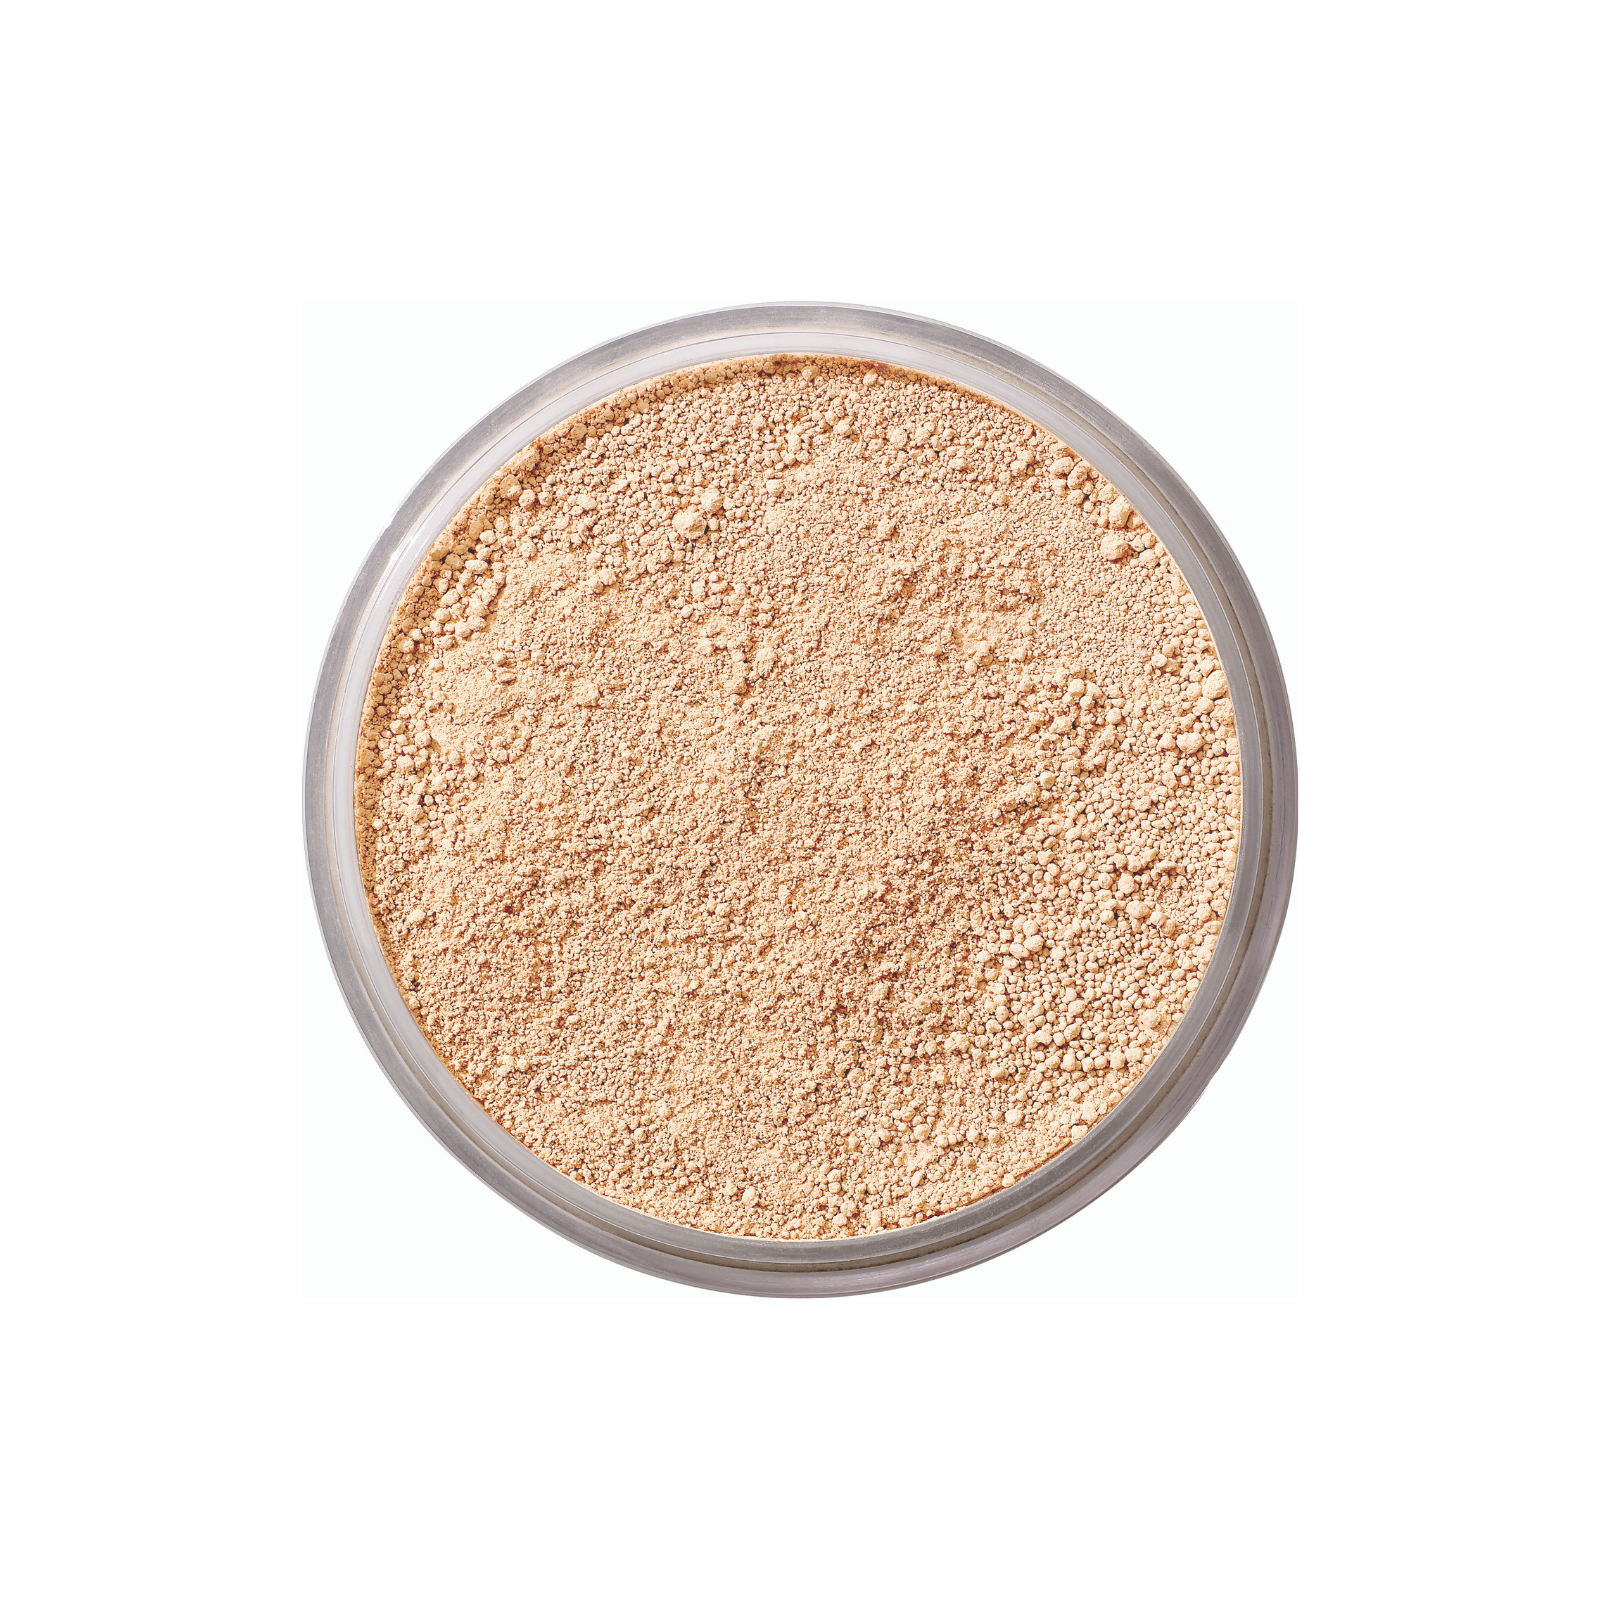 ASAP Loose Mineral Foundation with SPF15 - Pure One. Five 8g